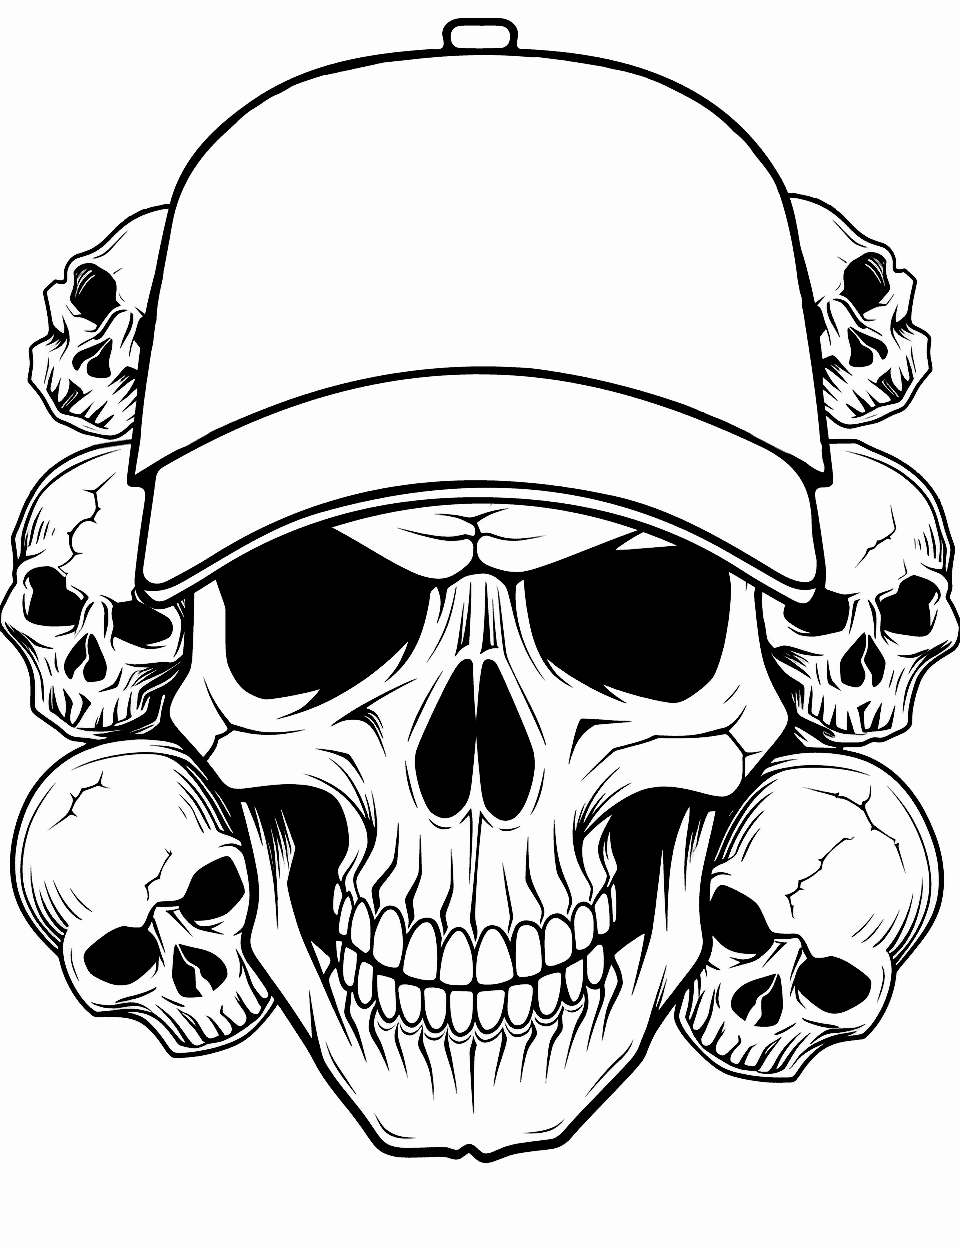 Sports Fanatic Skull Coloring Page - A skull wearing a baseball cap, surrounded by various smaller skulls.